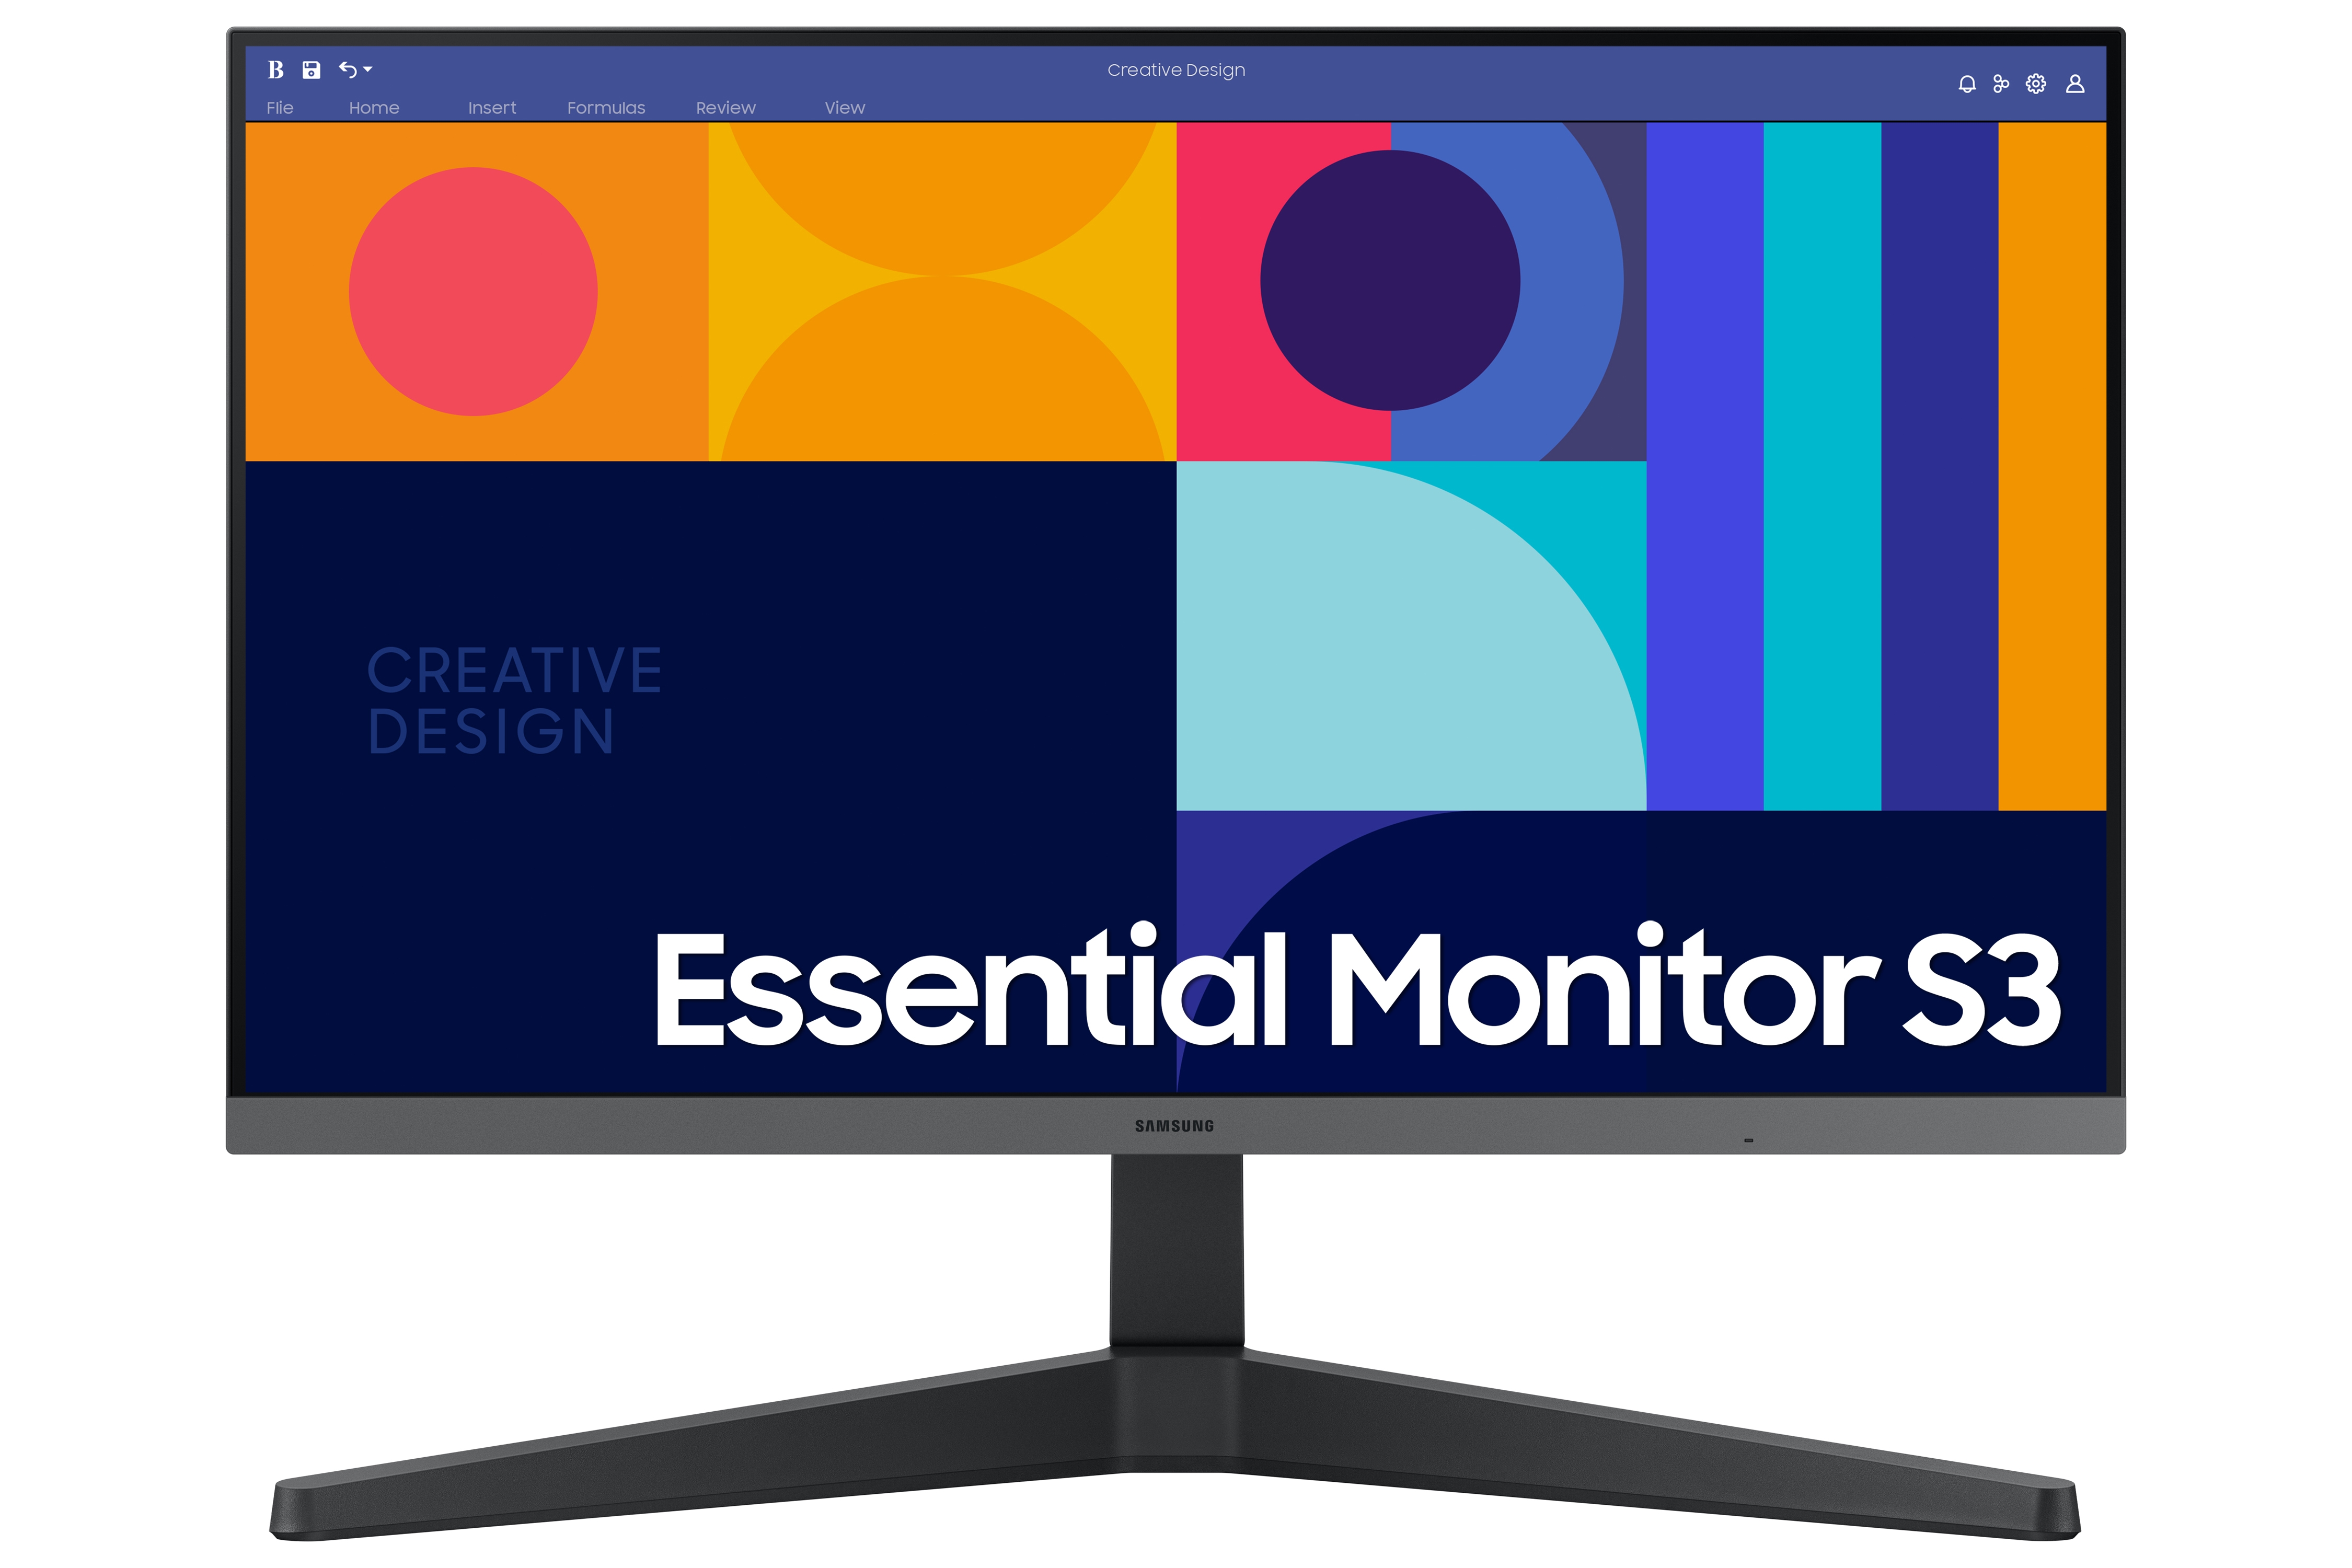 24 S33GC Business Essential Monitor with IPS Panel